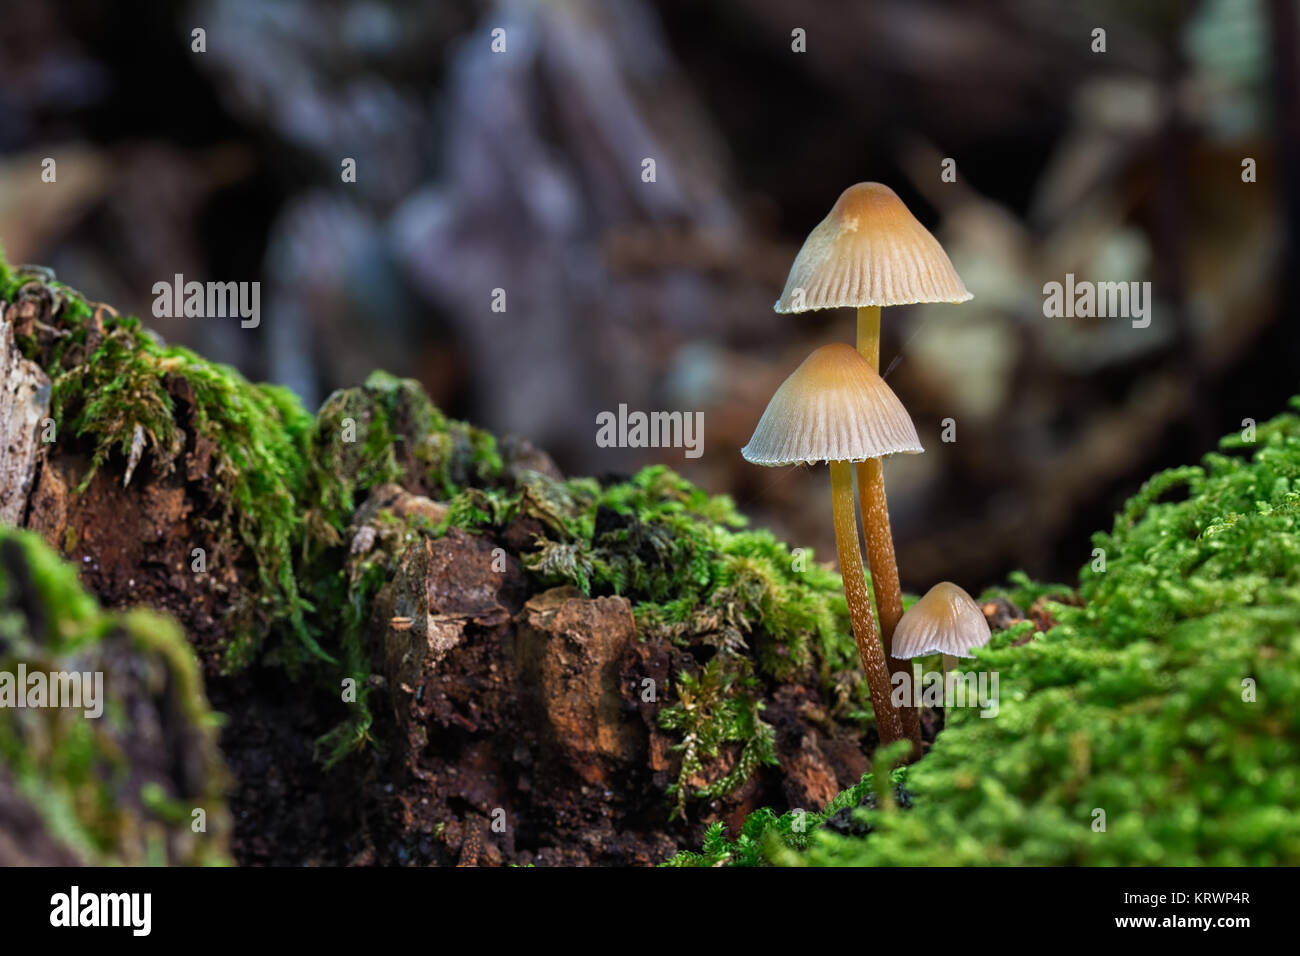 Small mushrooms photographed in their natural environment. Stock Photo